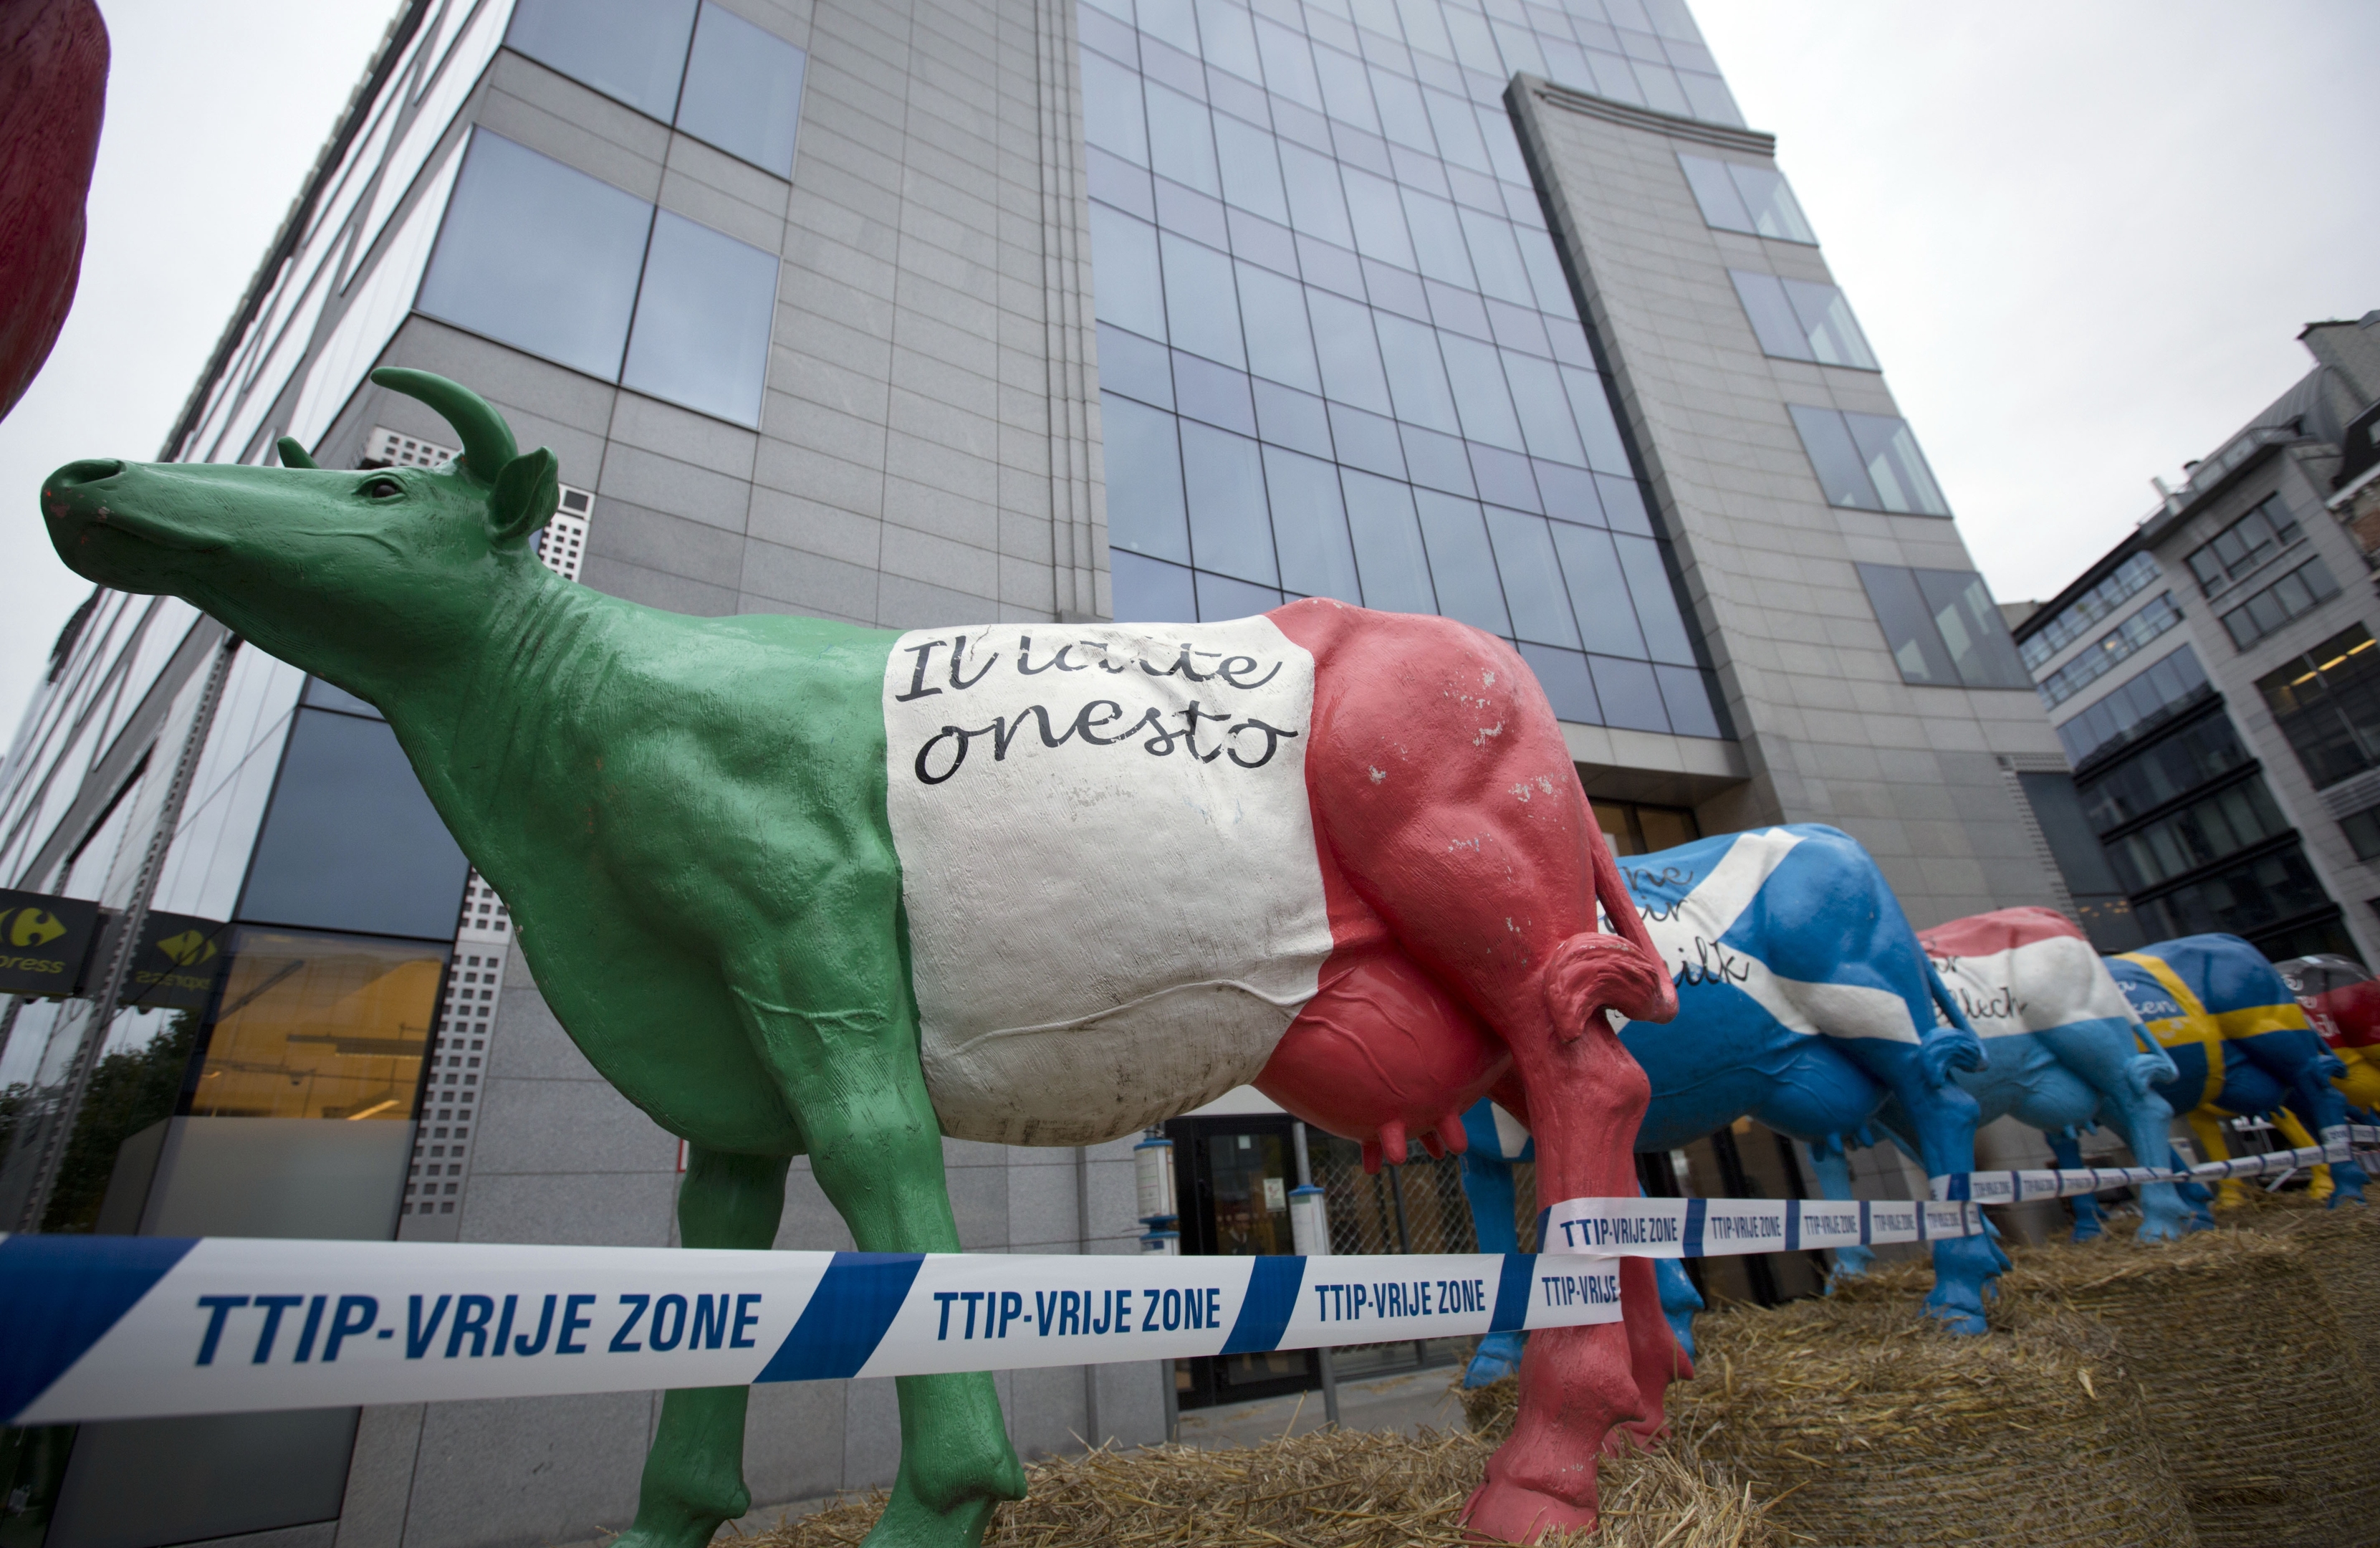 Plastic cows are lined up on hay bales in front of EU headquarters 